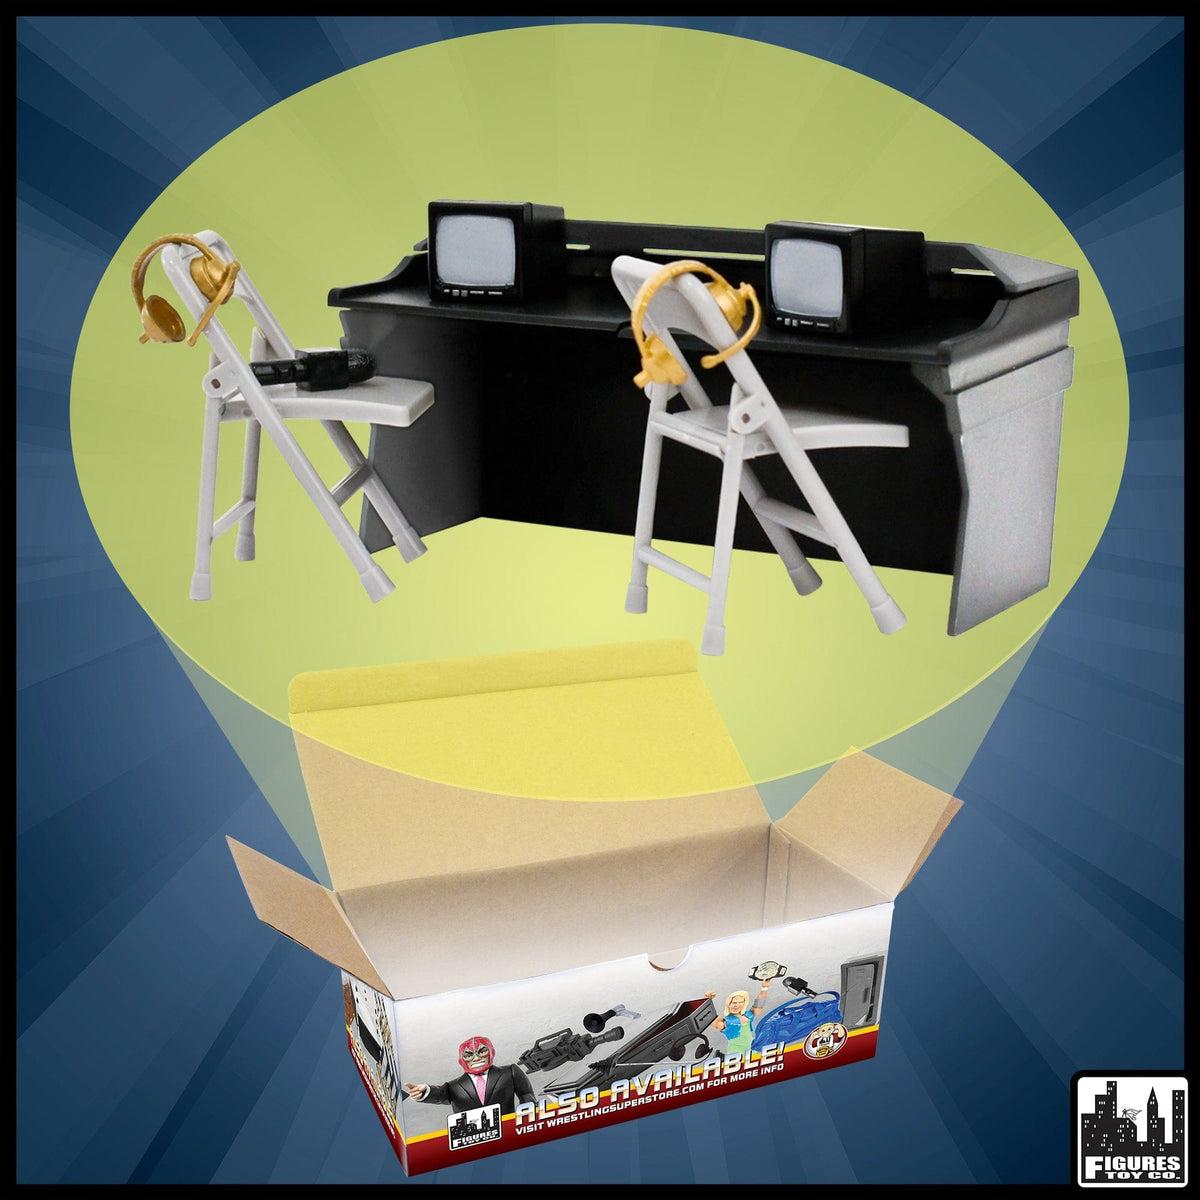 Black &amp; Gray Commentator Table Playset For WWE Wrestling Action Figures